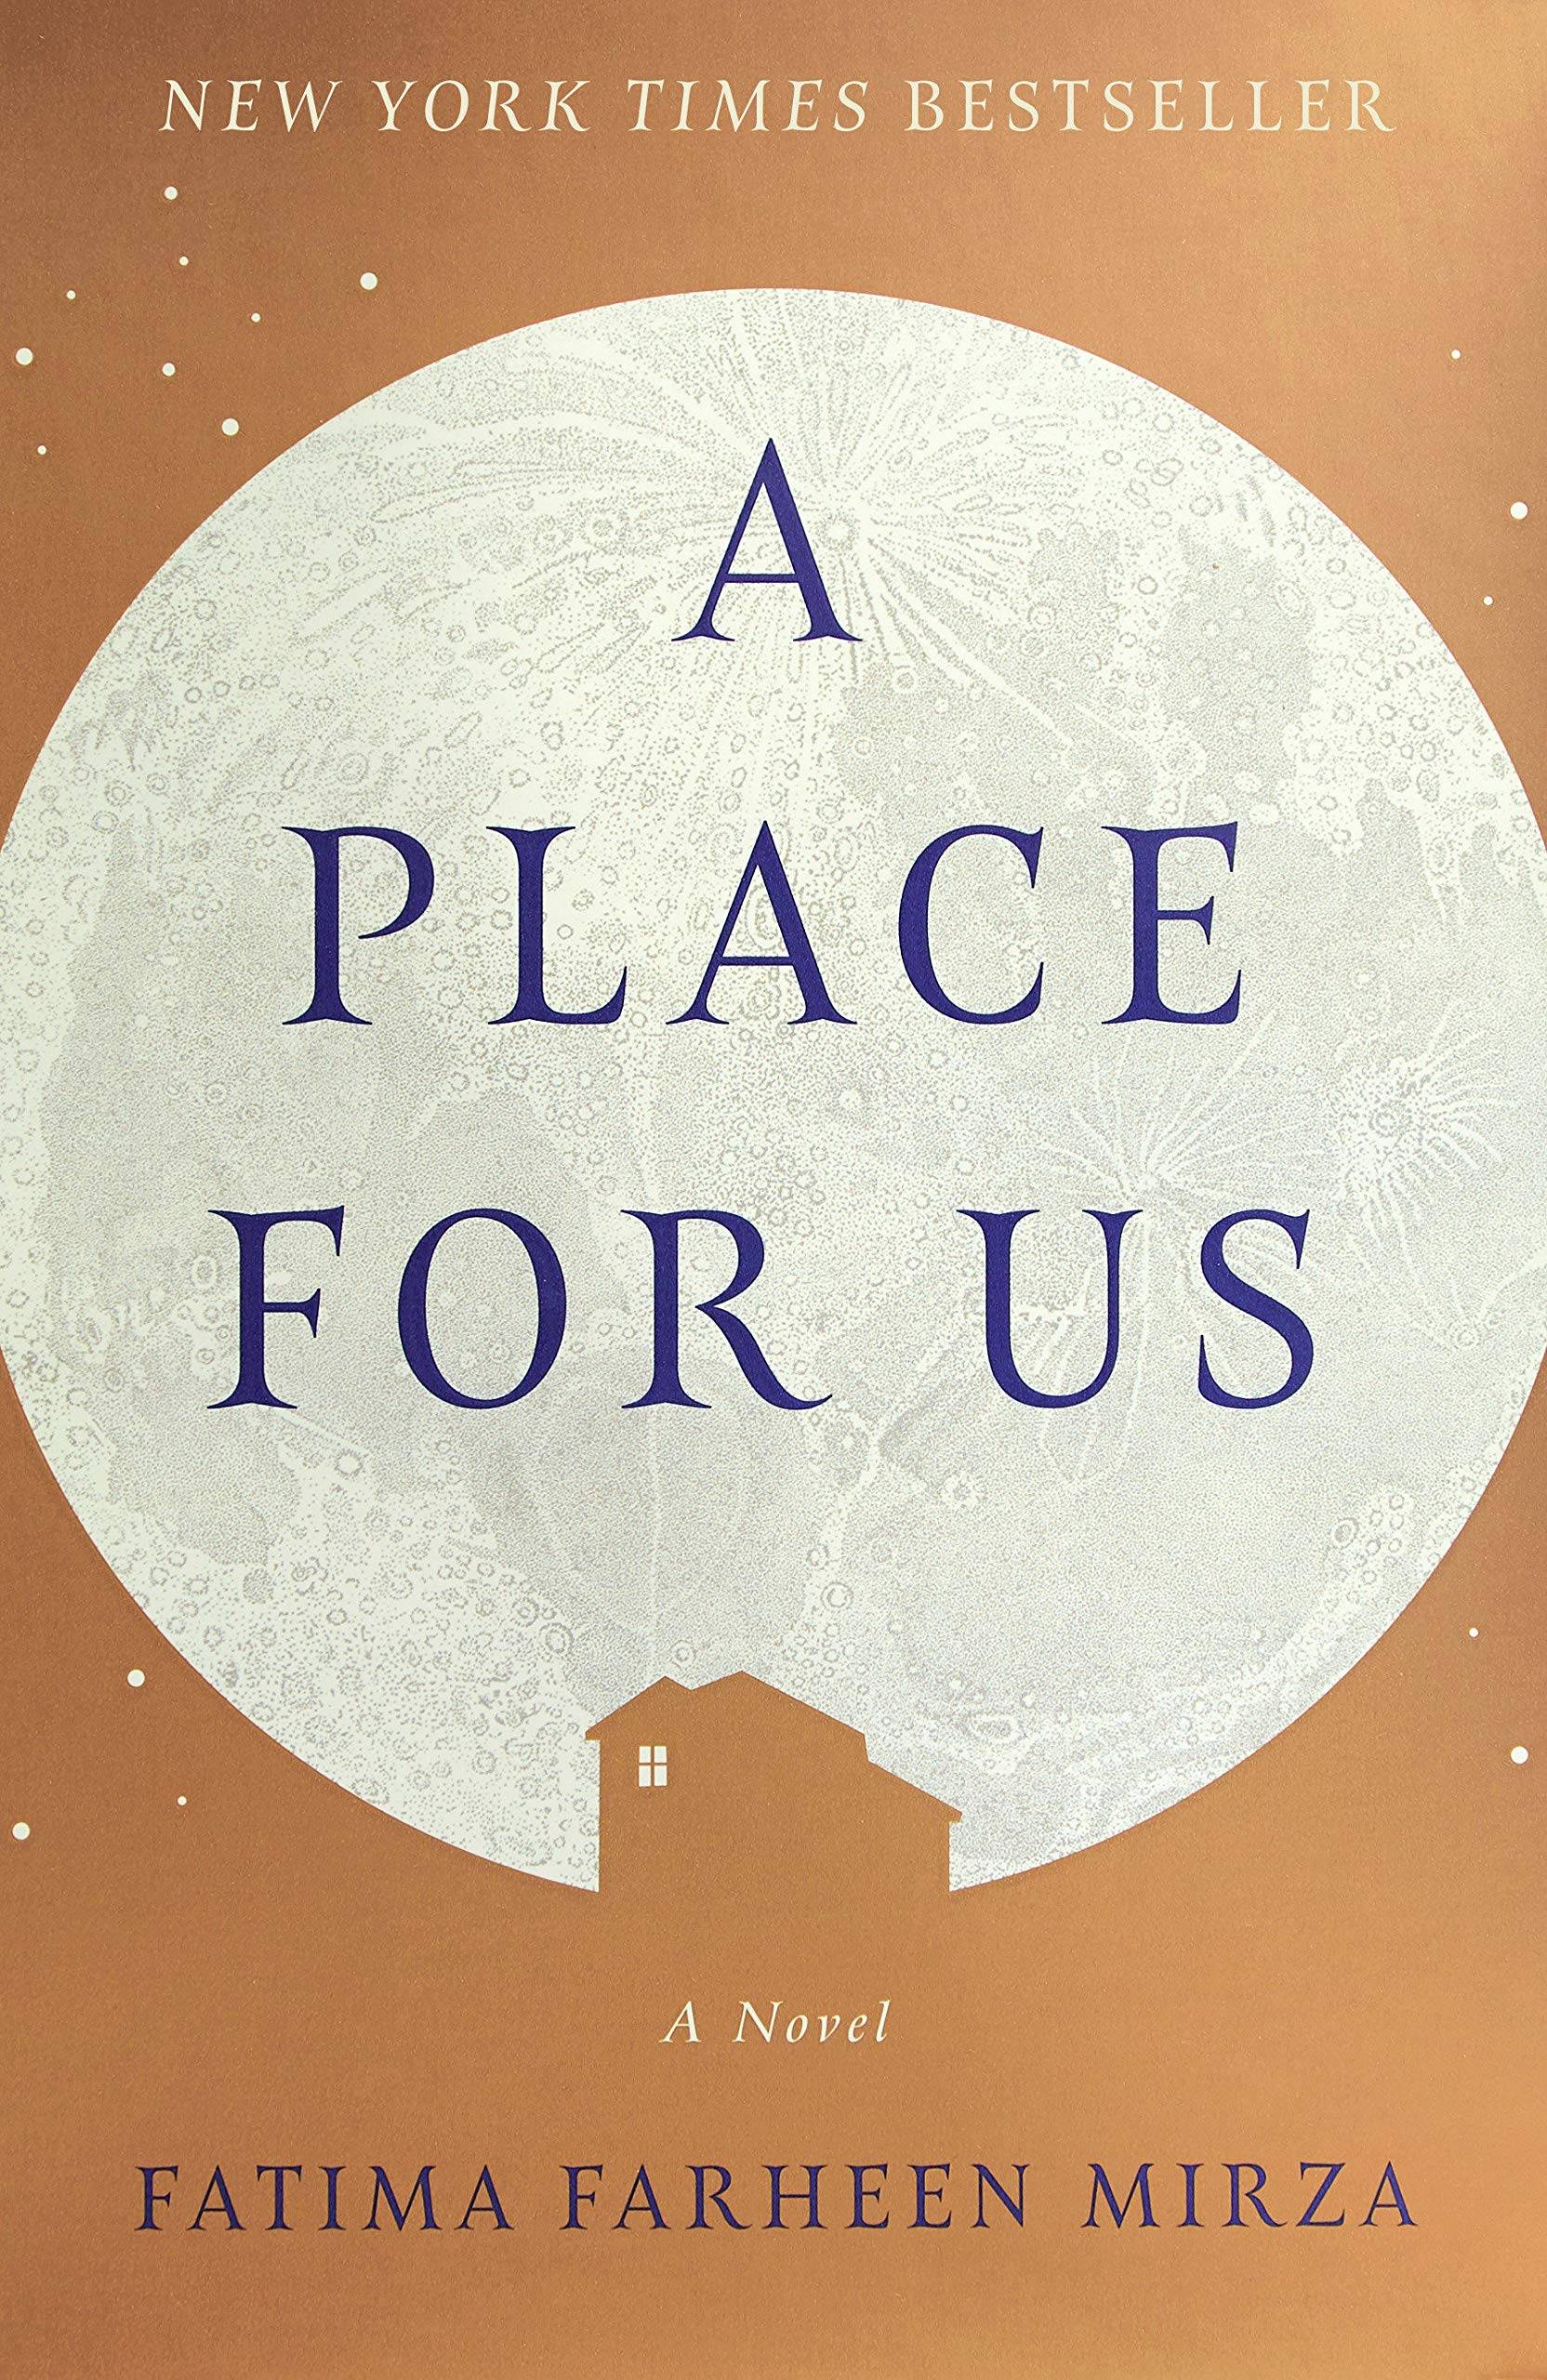 Book cover of "A Place for Us" featuring the silhouette of a house against a large white moon.